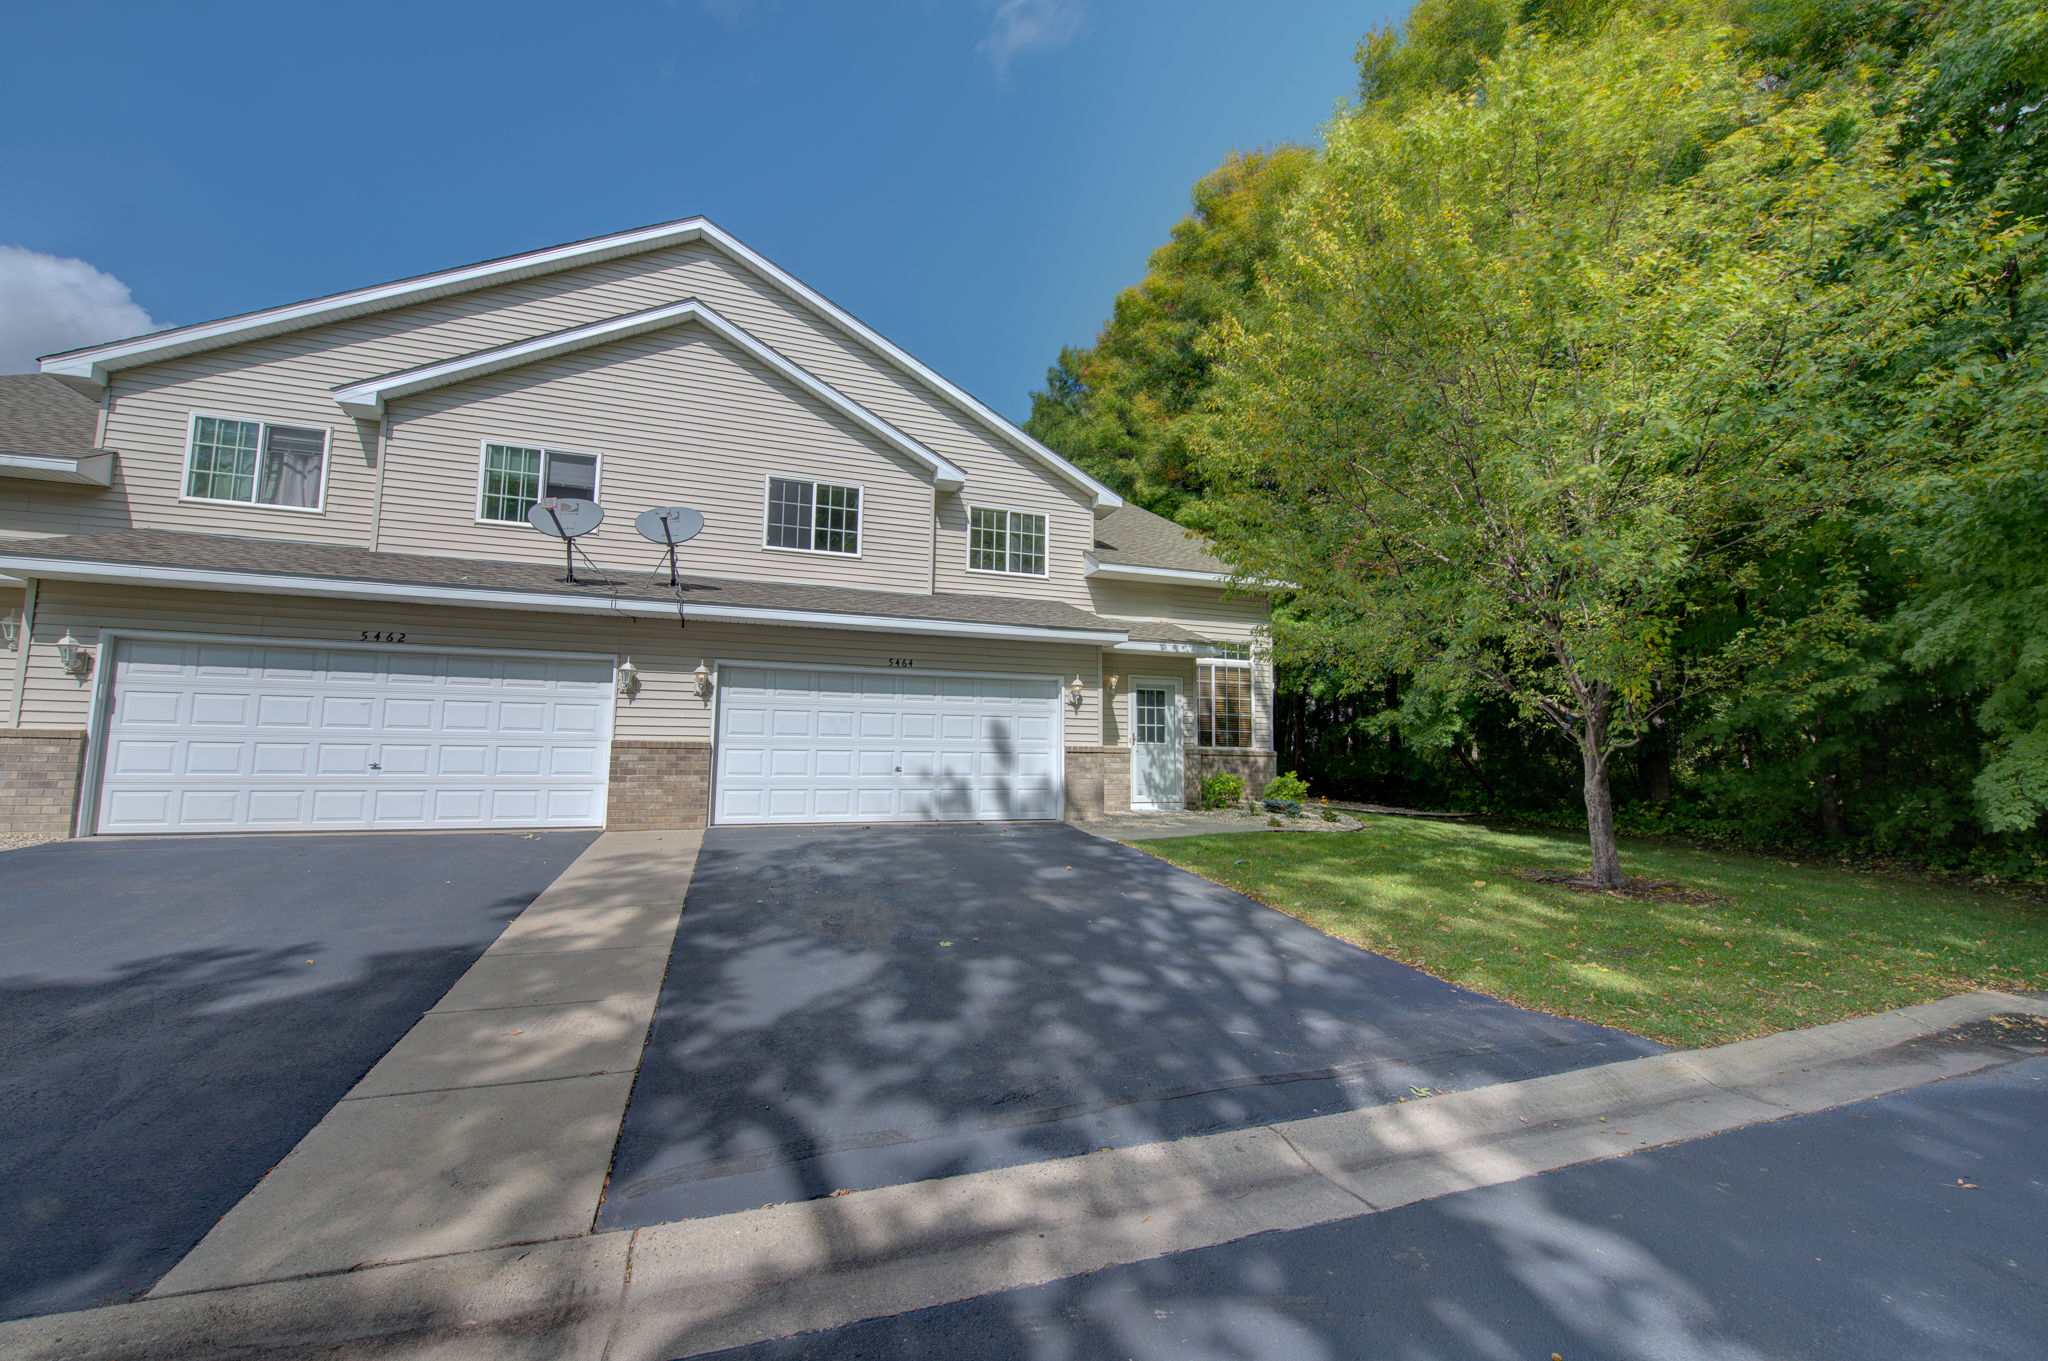  5464 Fawn Meadow Curve, Prior Lake, MN 55372, US